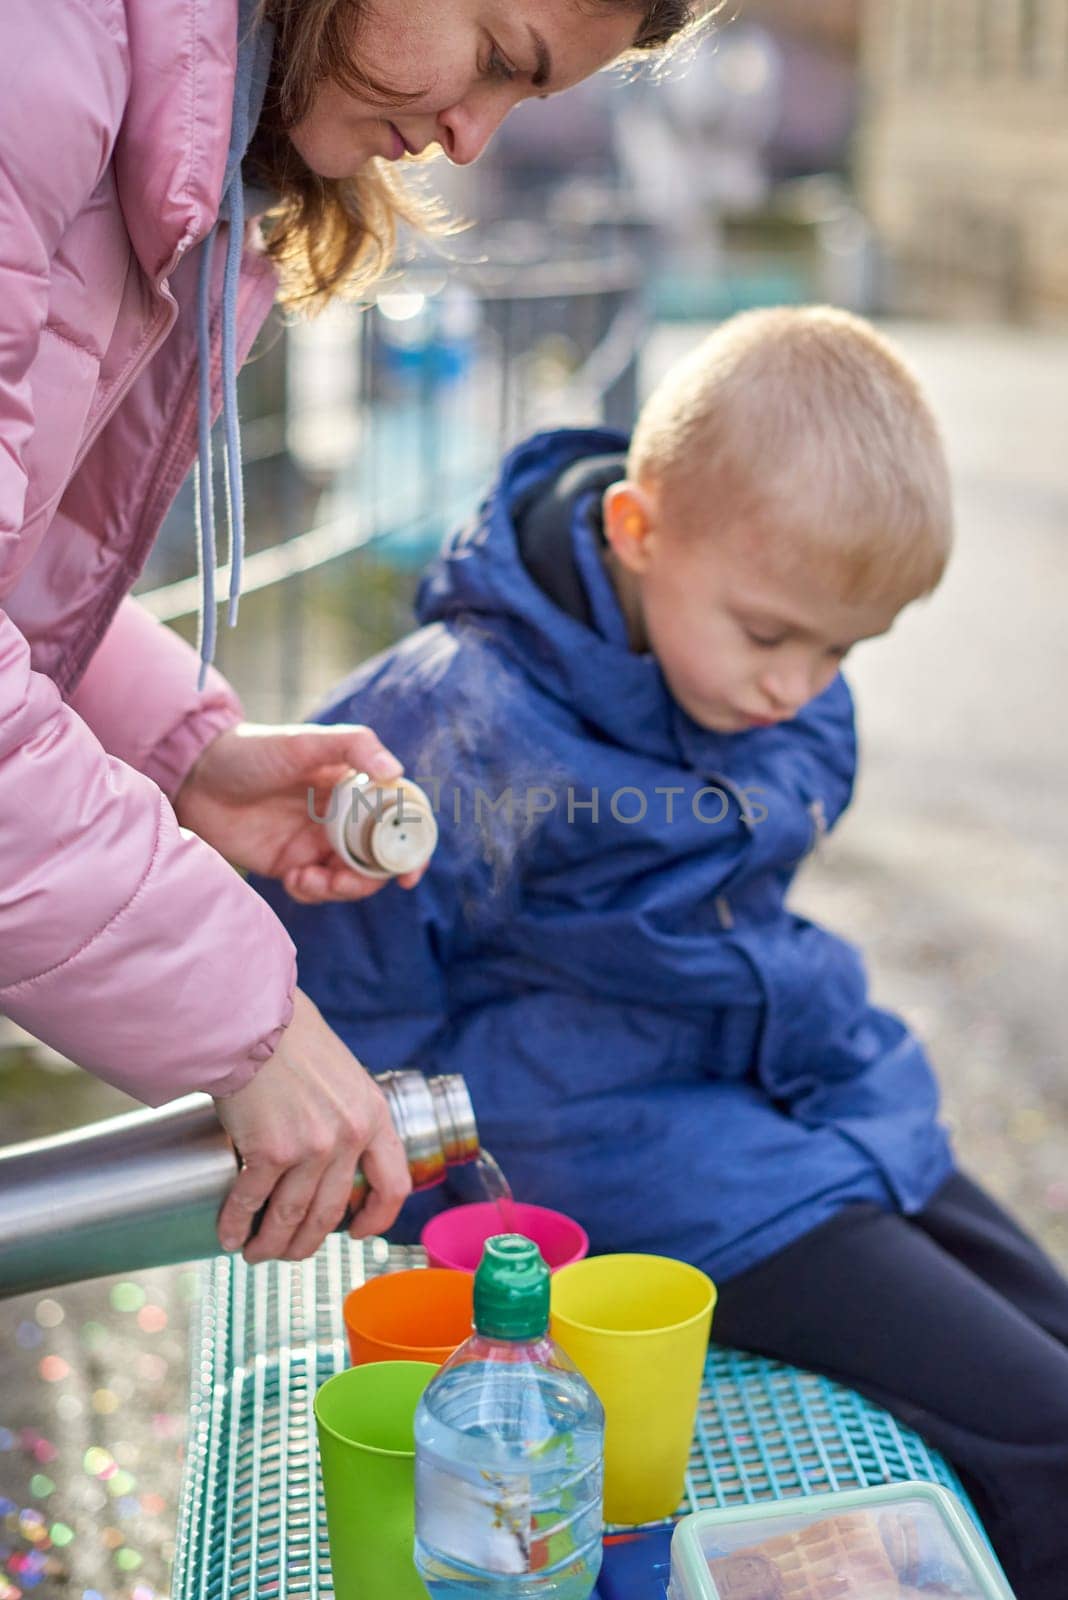 Family Picnic Delight: Cheerful 8-Year-Old Blond Boy in Blue Winter Jacket Sits on Bench While Mom Pours Tea from Thermos, Autumn or Winter. Immerse yourself in the warmth of family moments with this heartening image featuring a joyful 8-year-old blond boy in a blue winter jacket, sitting on a bench while his mom pours tea from a thermos into colorful plastic cups. The photograph captures the essence of a cozy family picnic in the refreshing outdoors during the autumn or winter season.